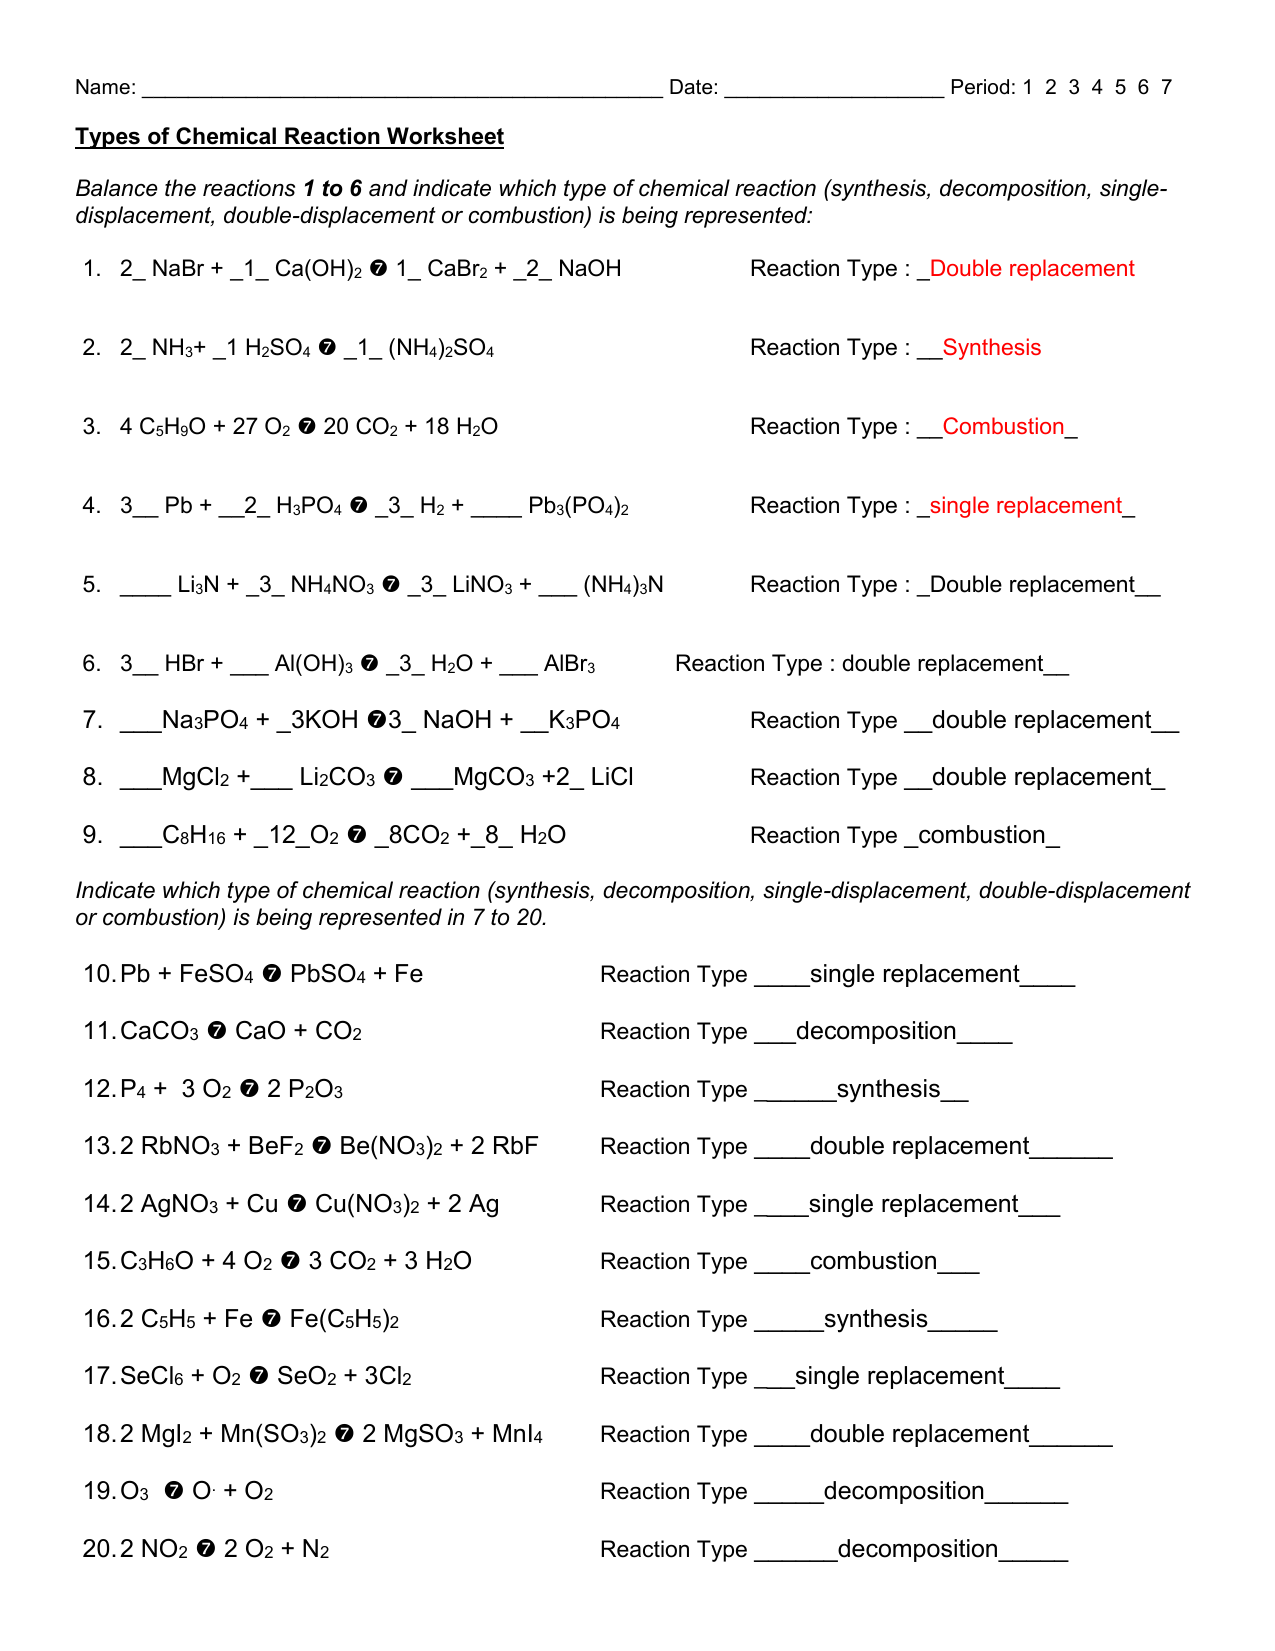 Types of Chemical Reaction Worksheetanswers Pertaining To Types Of Chemical Reactions Worksheet